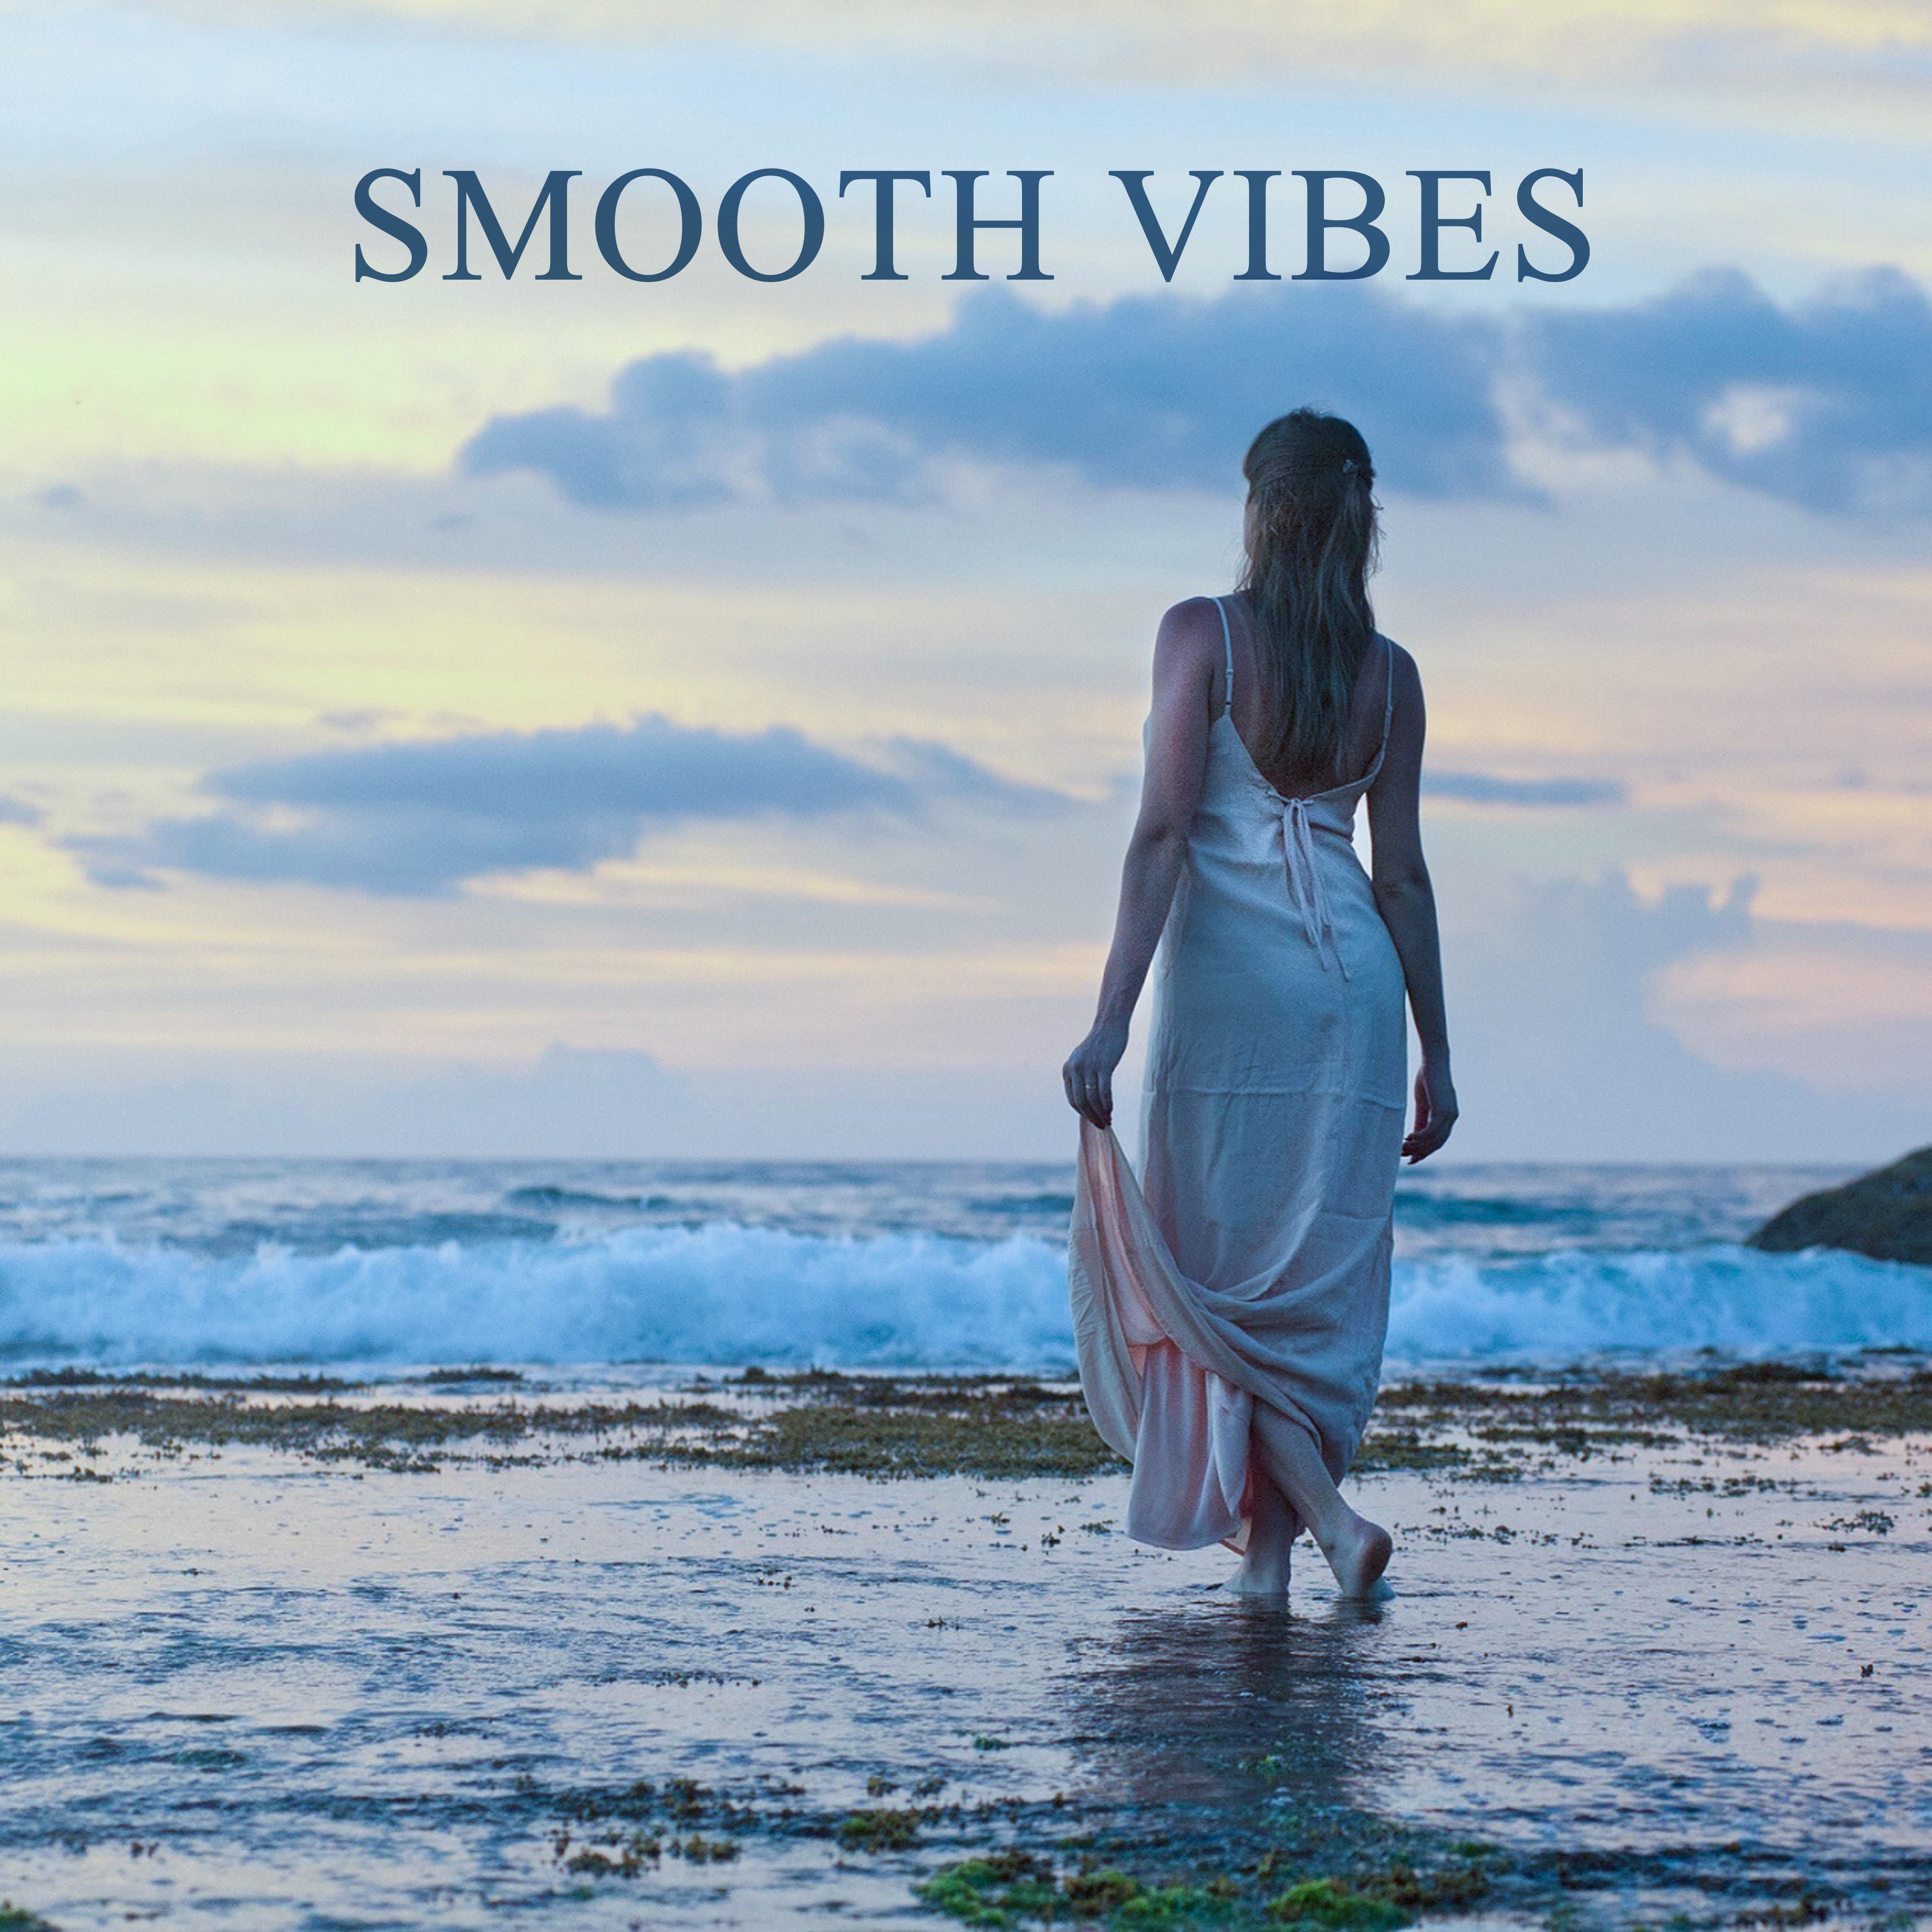 Smooth Vibes – Jazz 2017, Ambient Instrumental, Piano Bar, Chilled Jazz Lounge